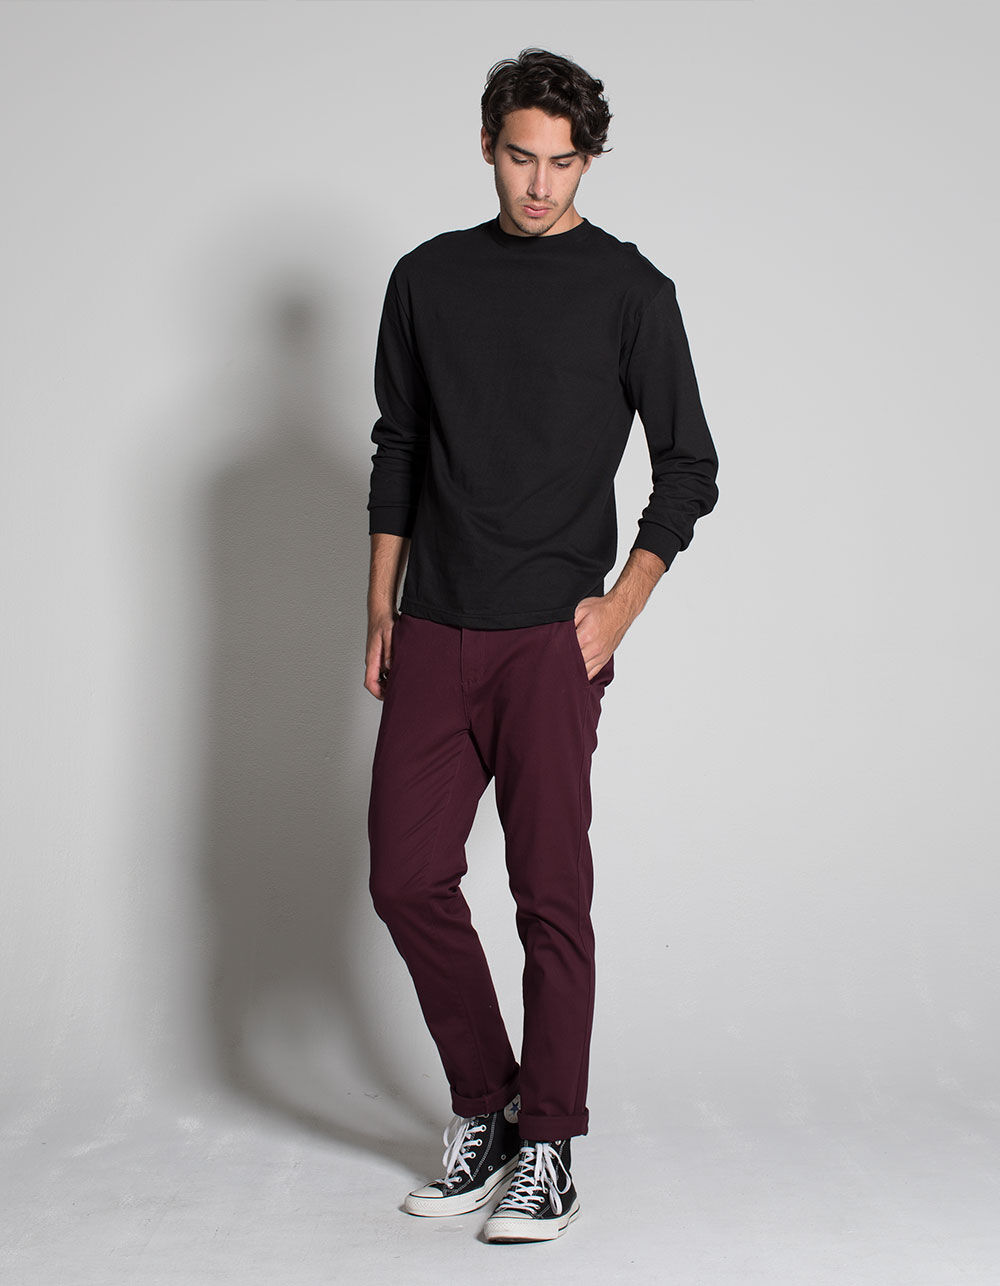 RSQ London Blackberry Mens Skinny Stretch Chino Pants image number 4